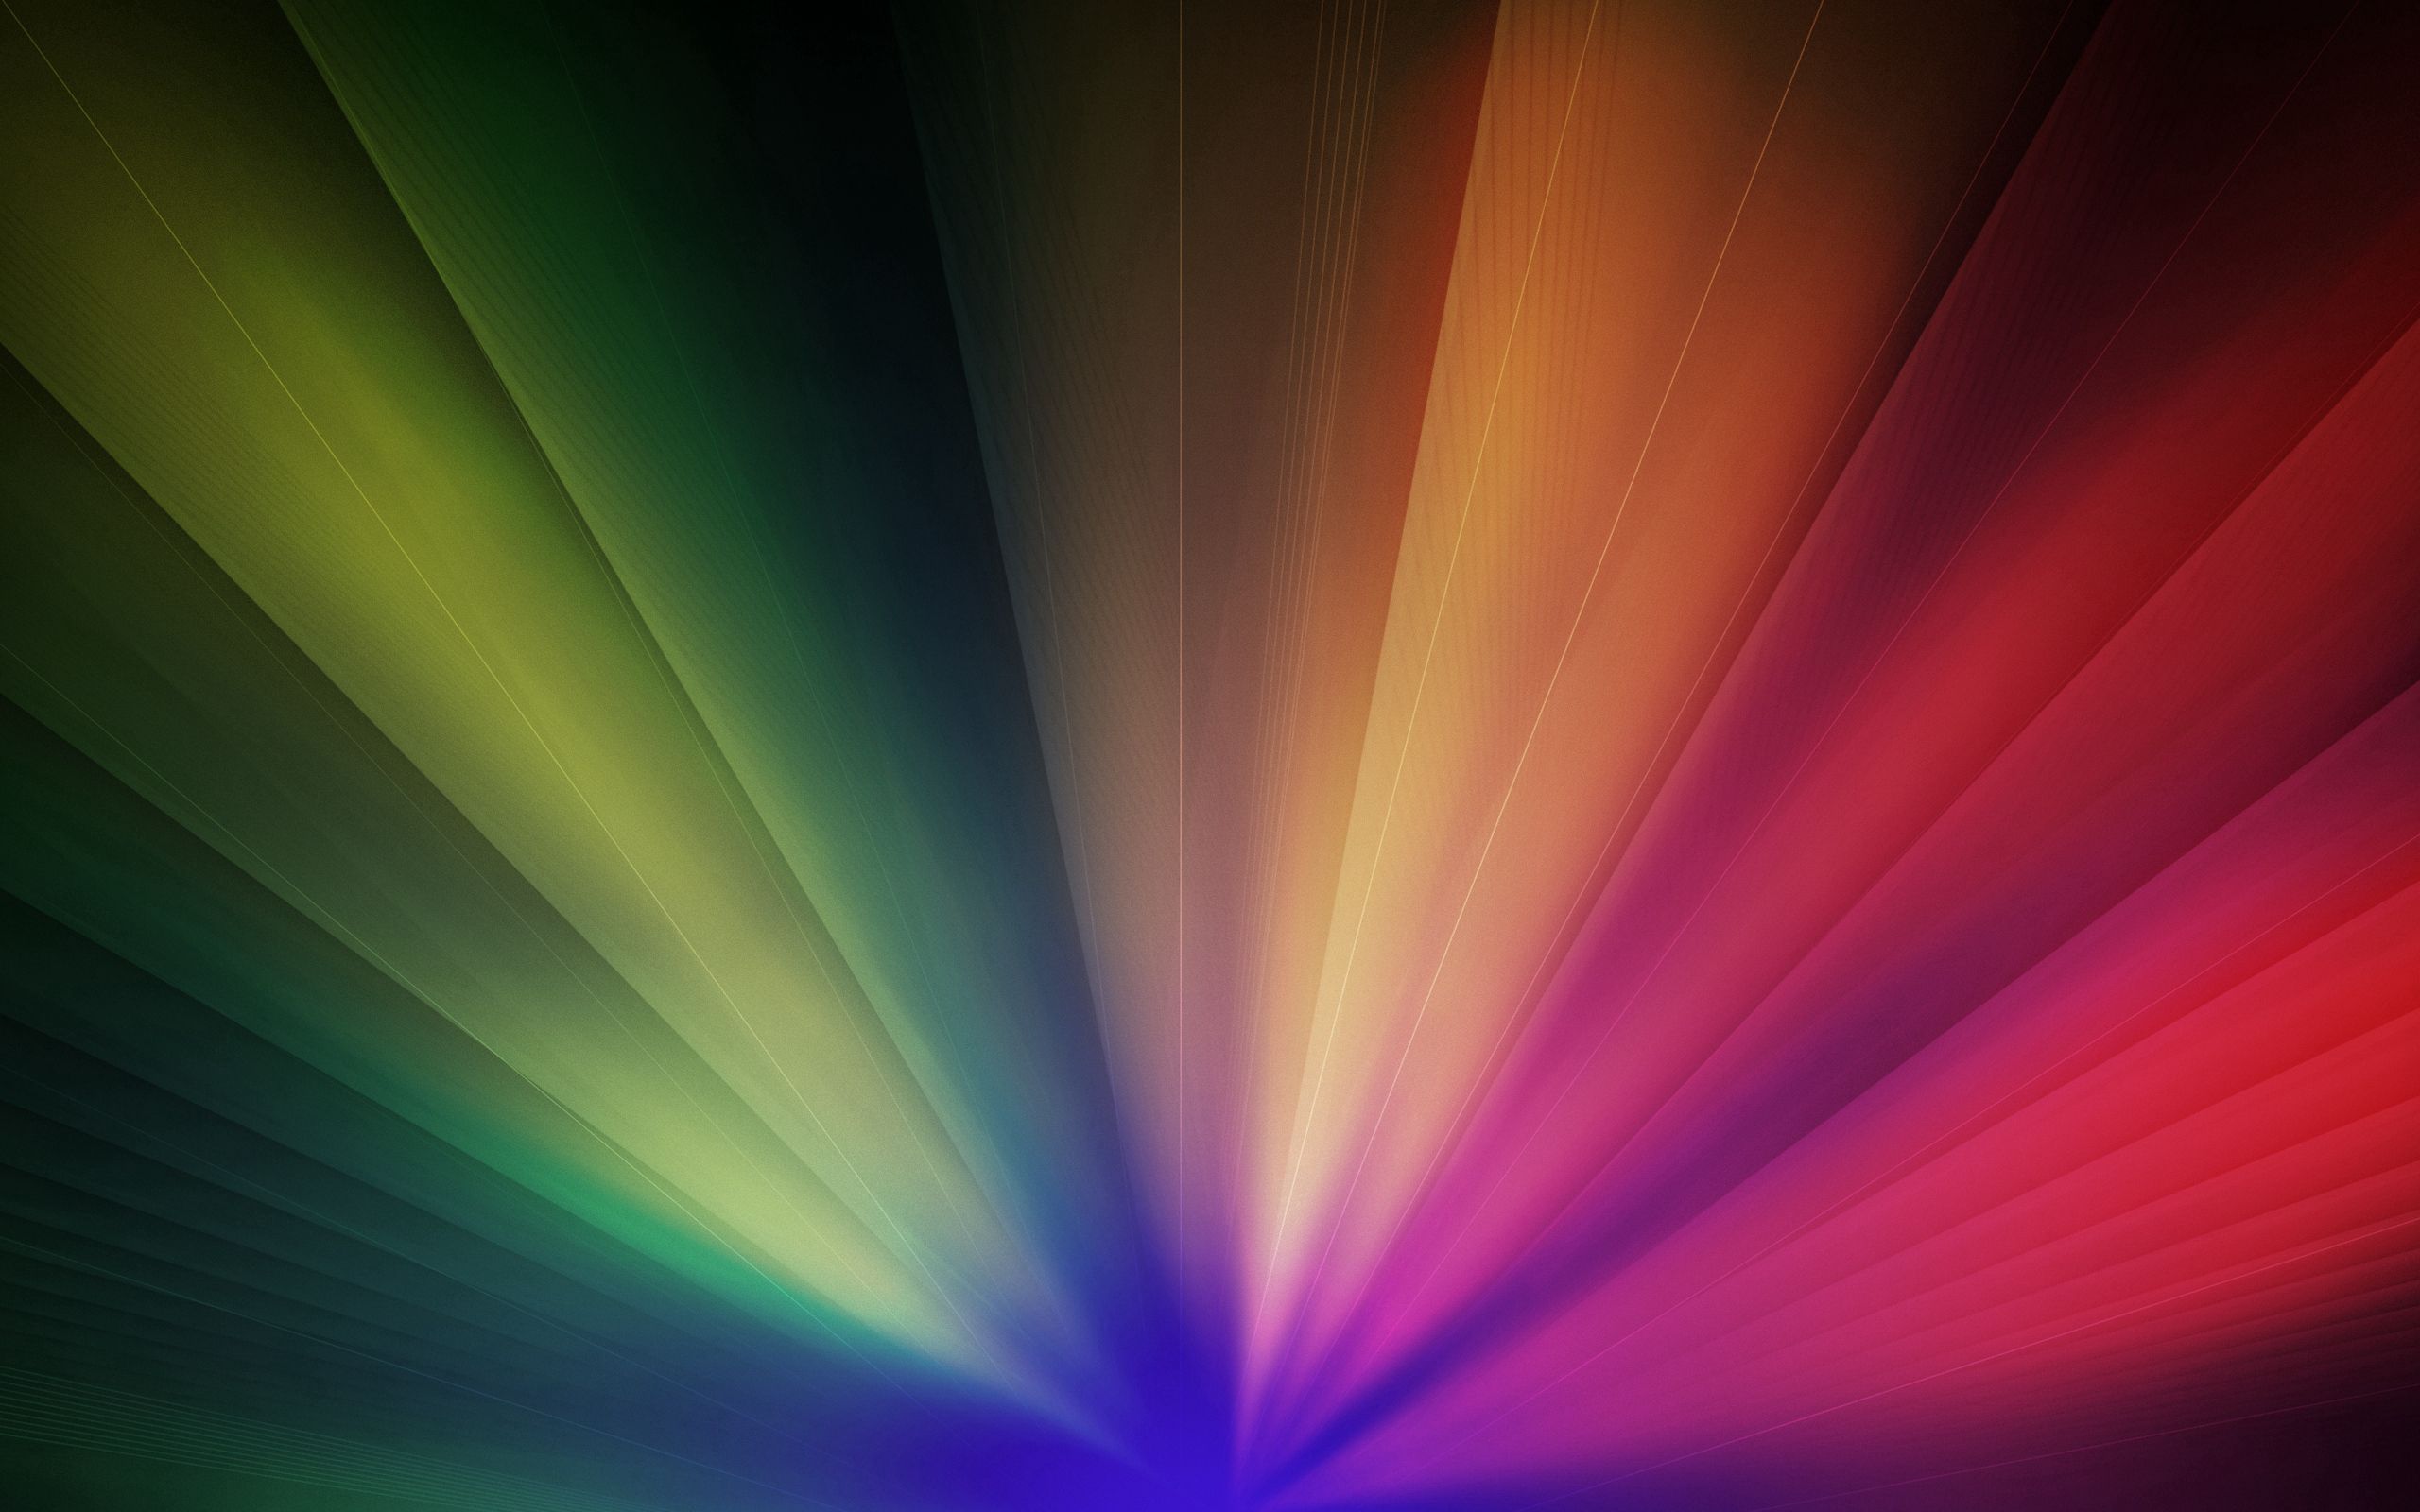 rainbow, abstract, shine, light, colorful, colourful, iridescent, fan